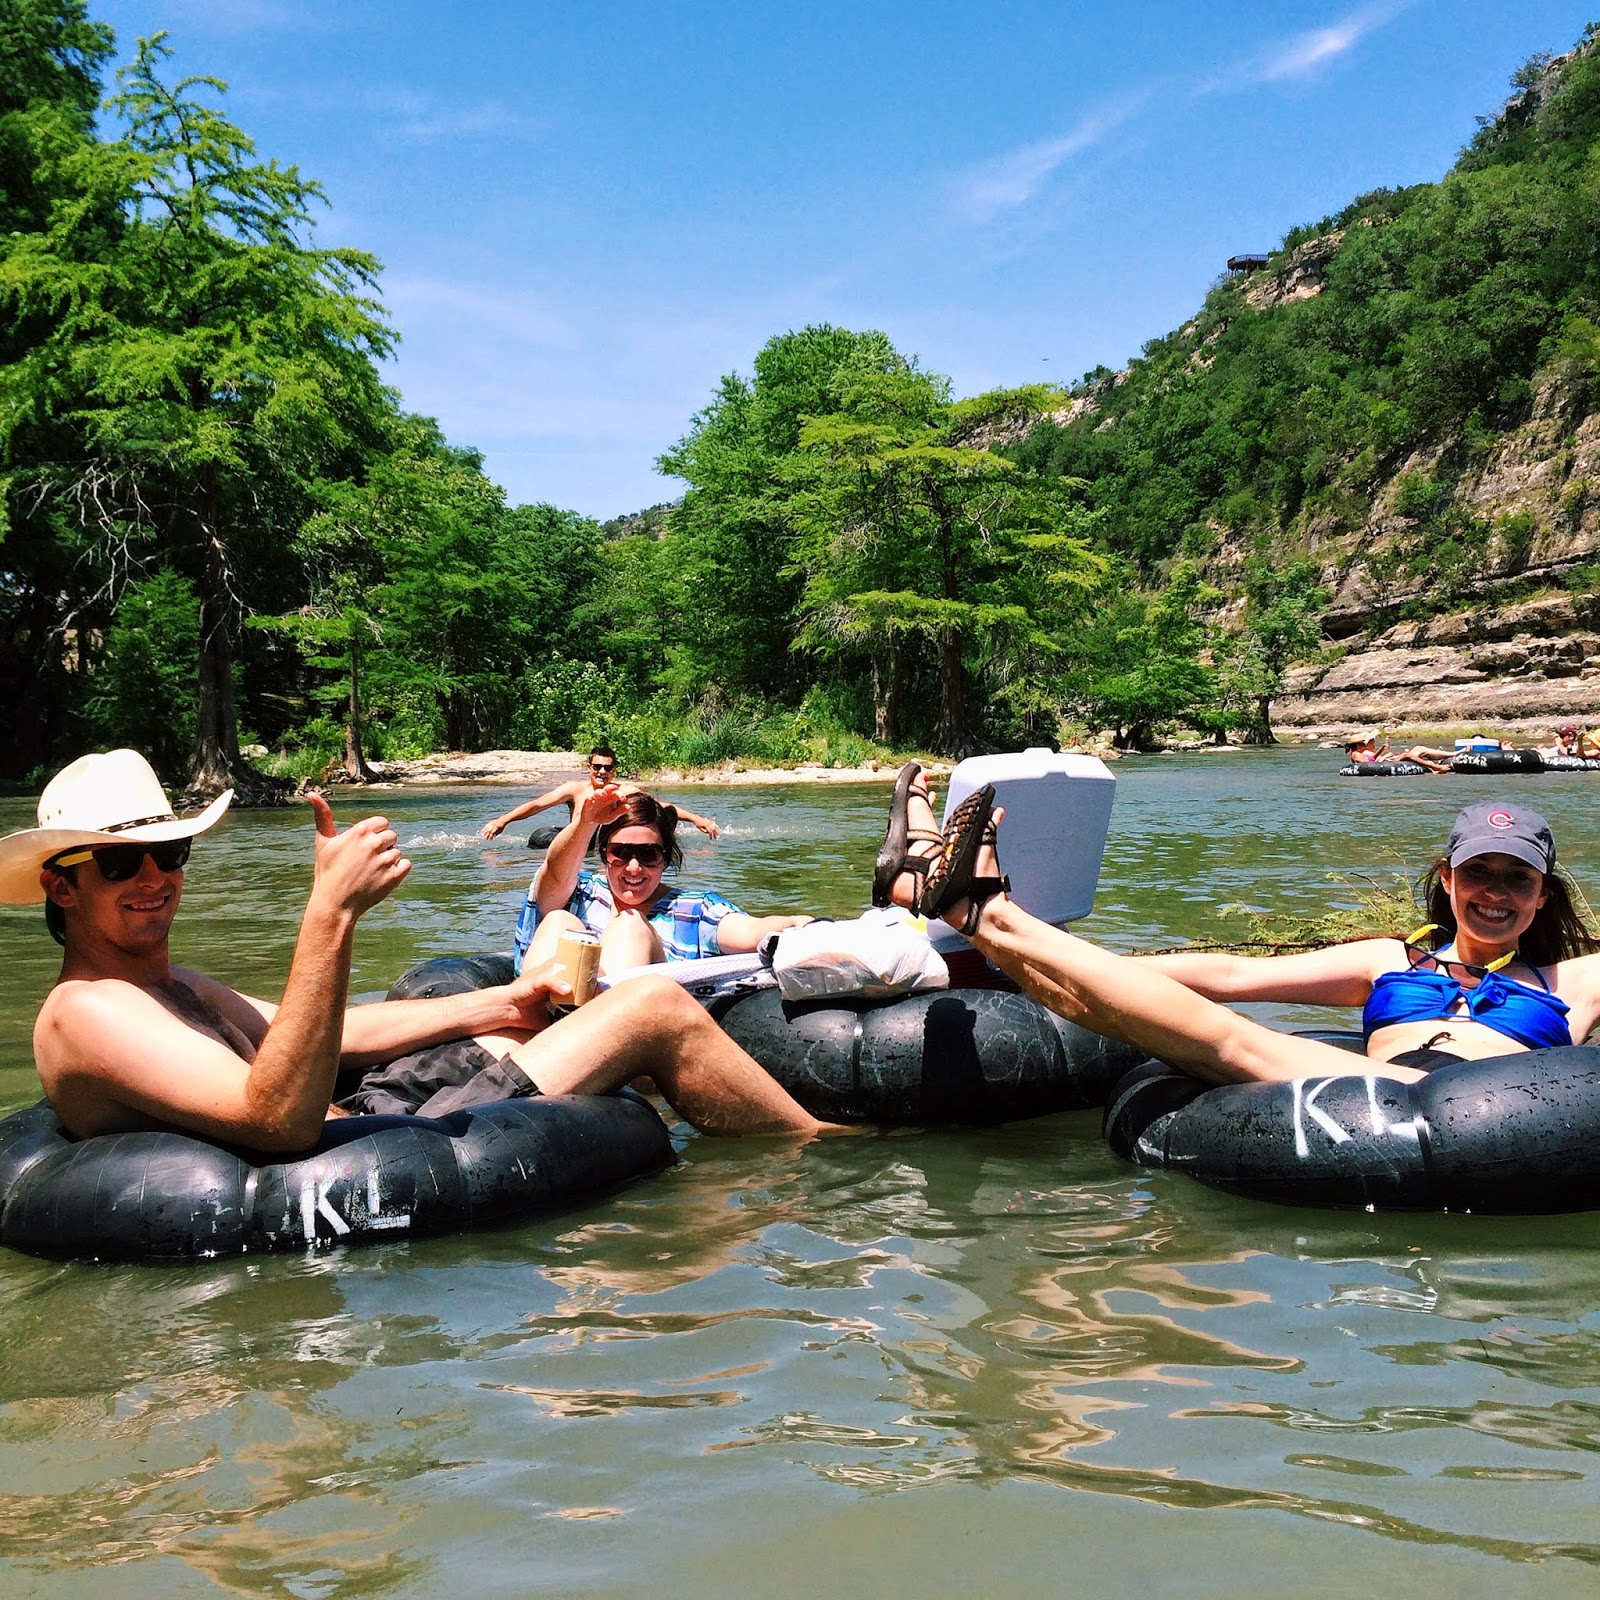 Trendy in Texas / New Braunfels, TX / KL Ranch / Camping / Guadalupe River